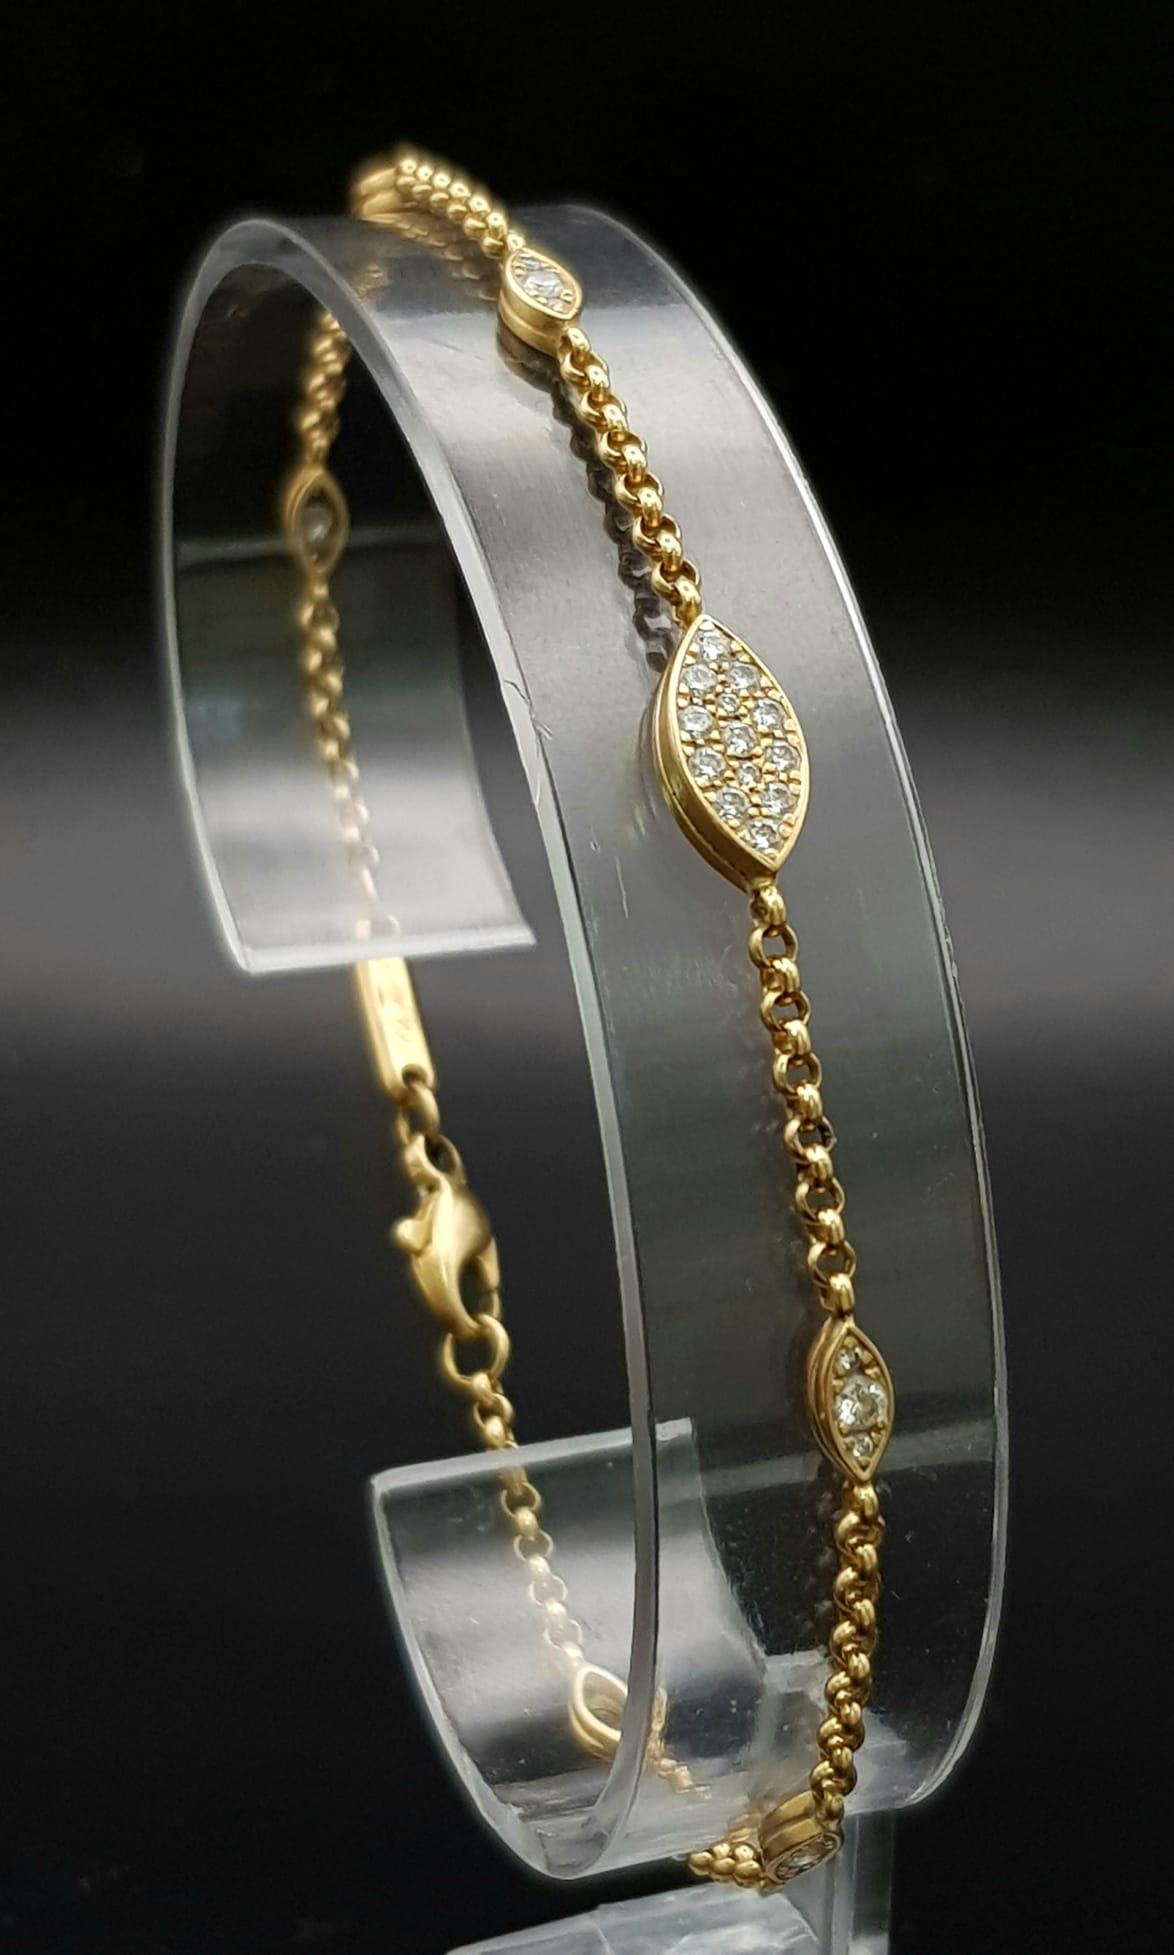 A Chopard 18k Gold and Diamond Bracelet. 18cm. 5.38g total weight. Ref: 11748 - Image 2 of 7